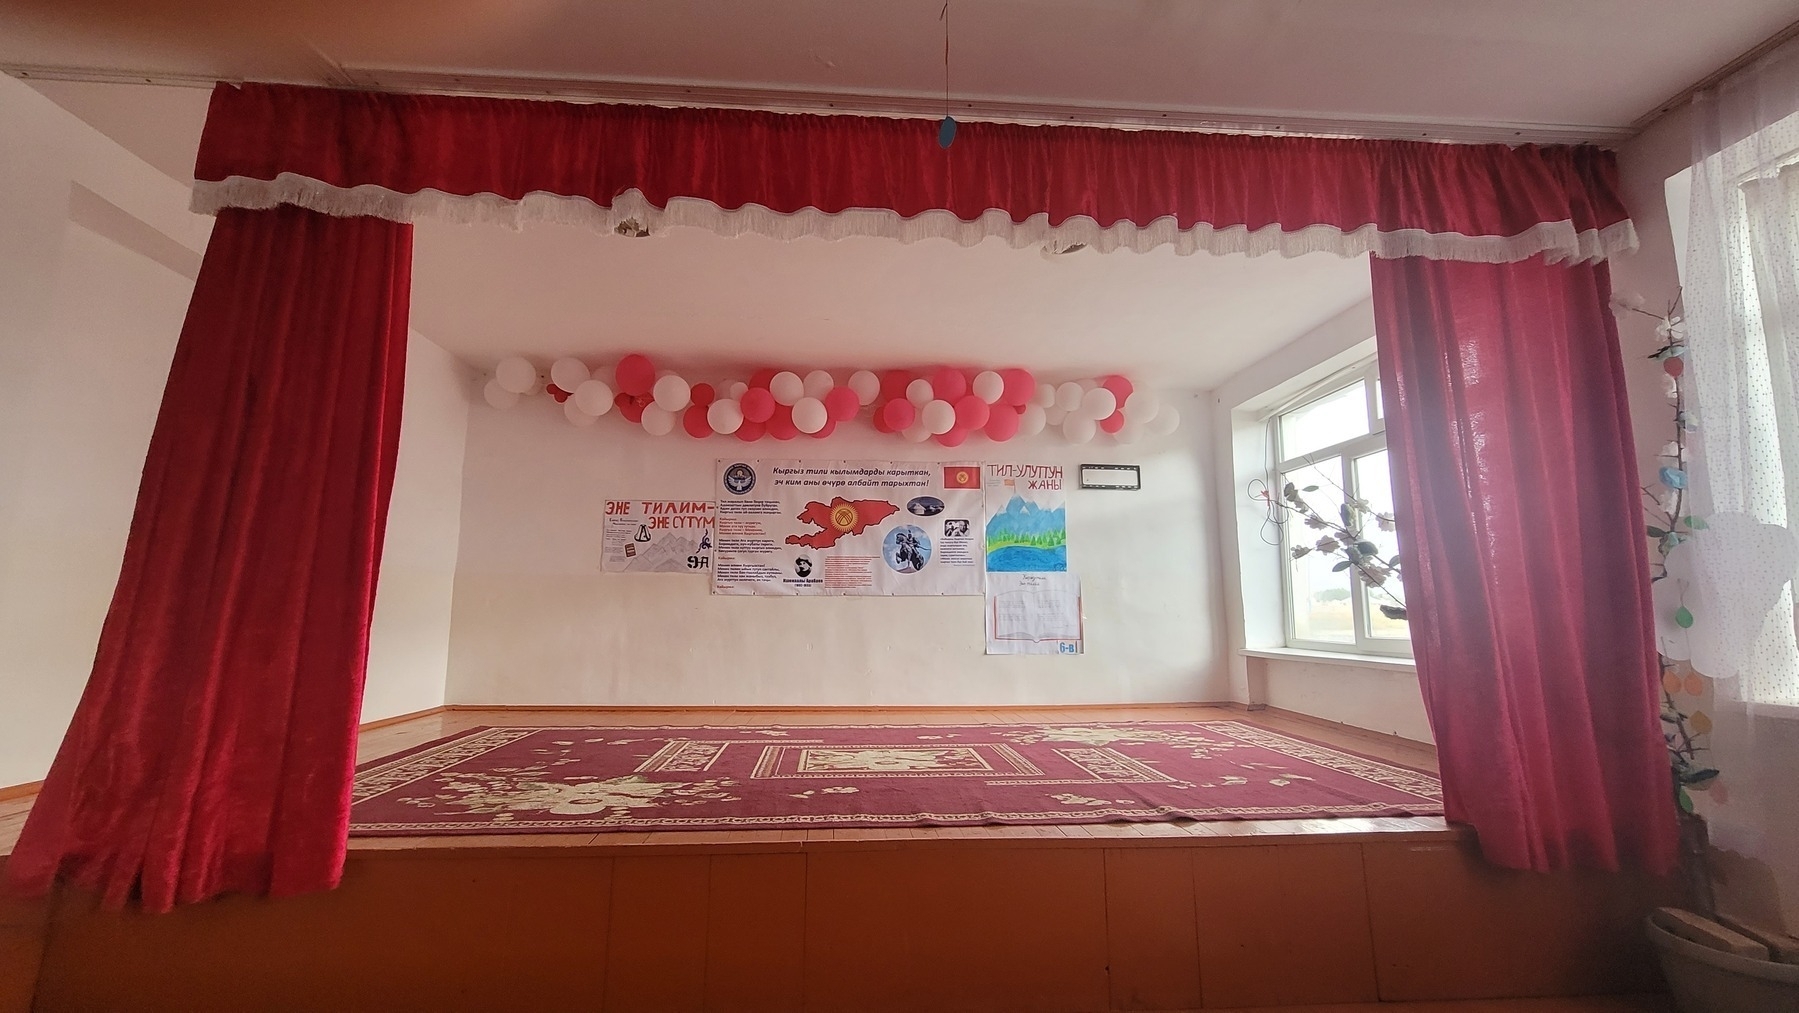 stage where students performed. brown/orange platform with a red rug on it, curtains framing it; red, pink and white balloons on the wall at the back of the performing area and hand-drawn student posters about Kyrgyzstan beneath those